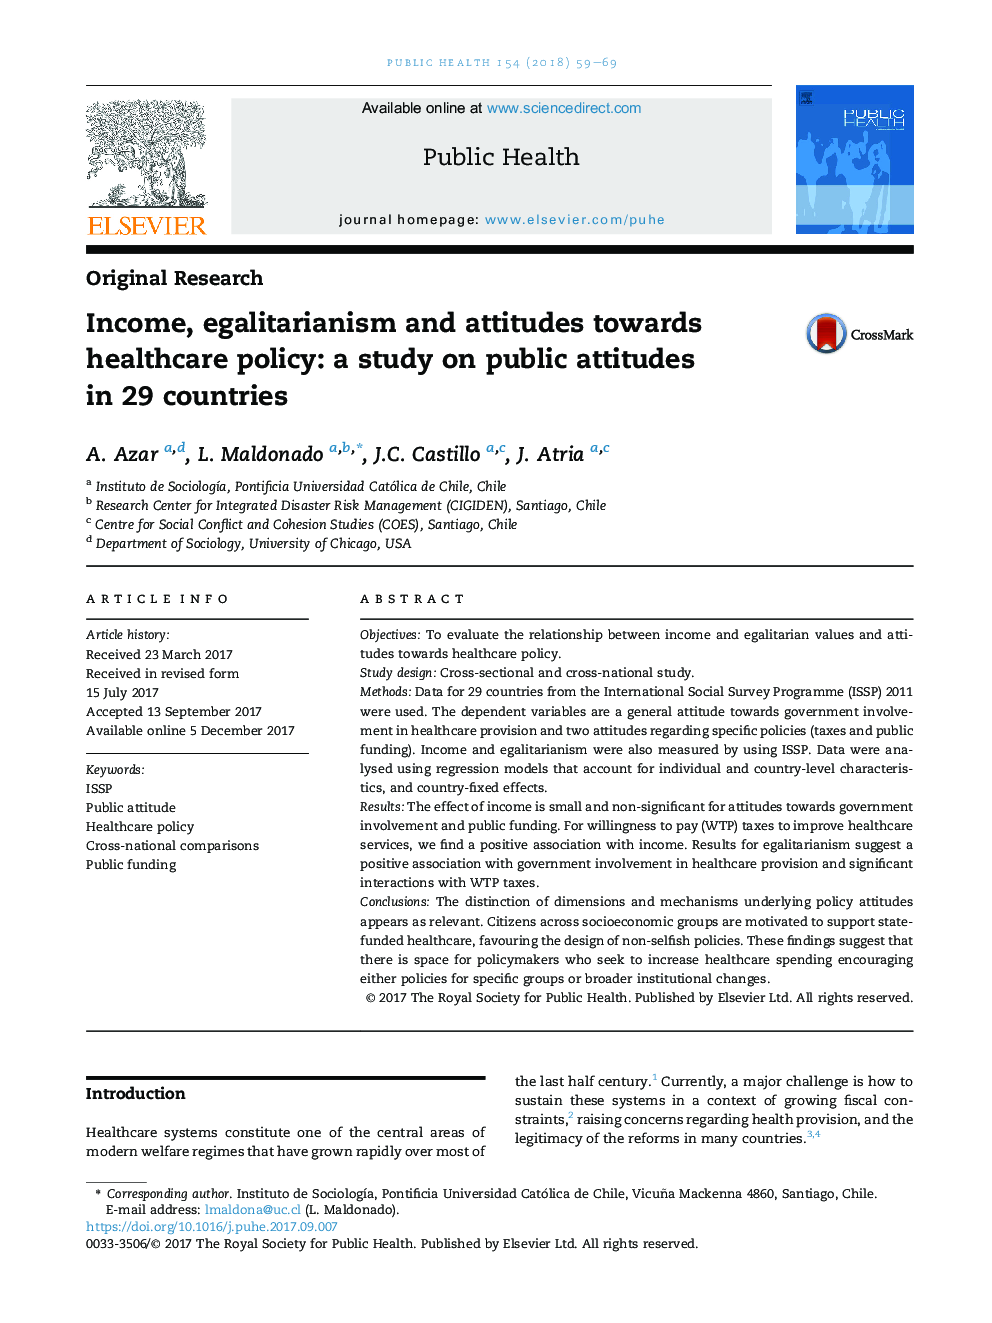 Income, egalitarianism and attitudes towards healthcare policy: a study on public attitudes inÂ 29Â countries